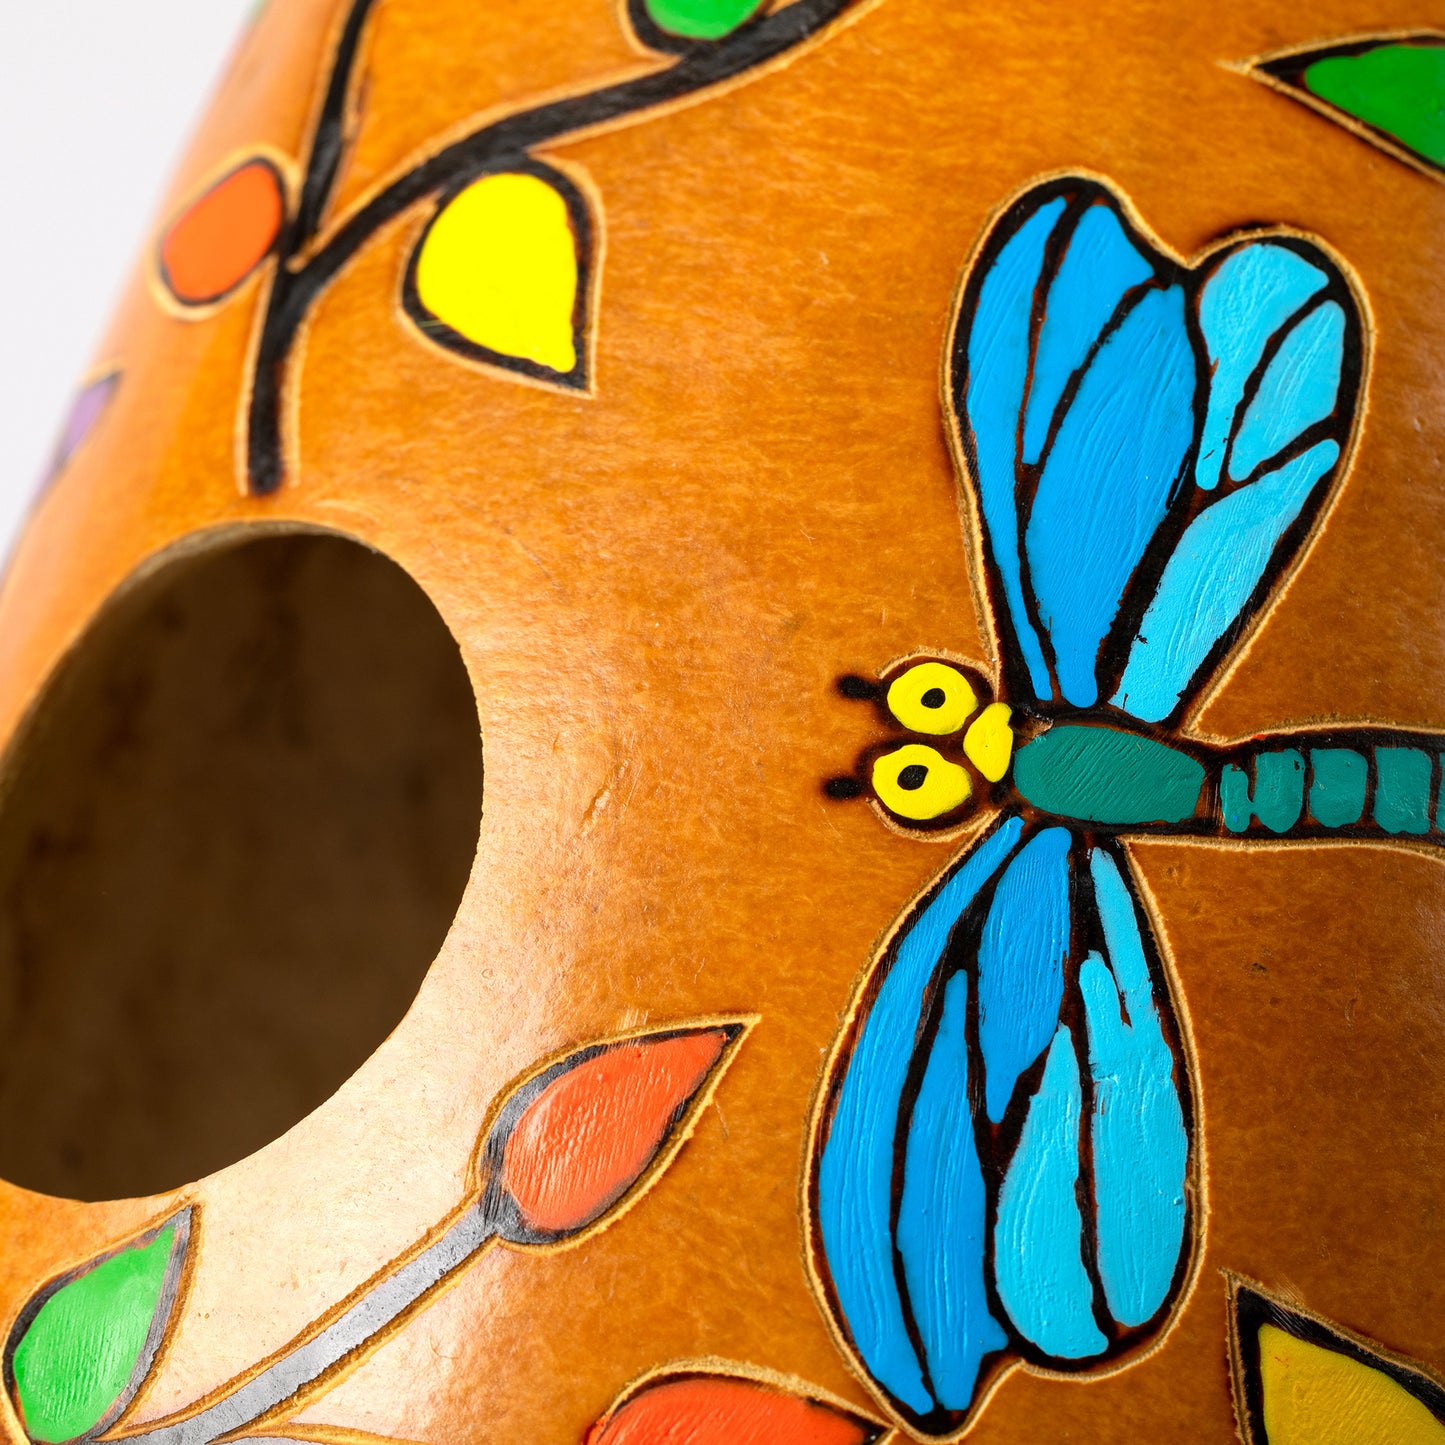 Hand Painted Gourd Birdhouse